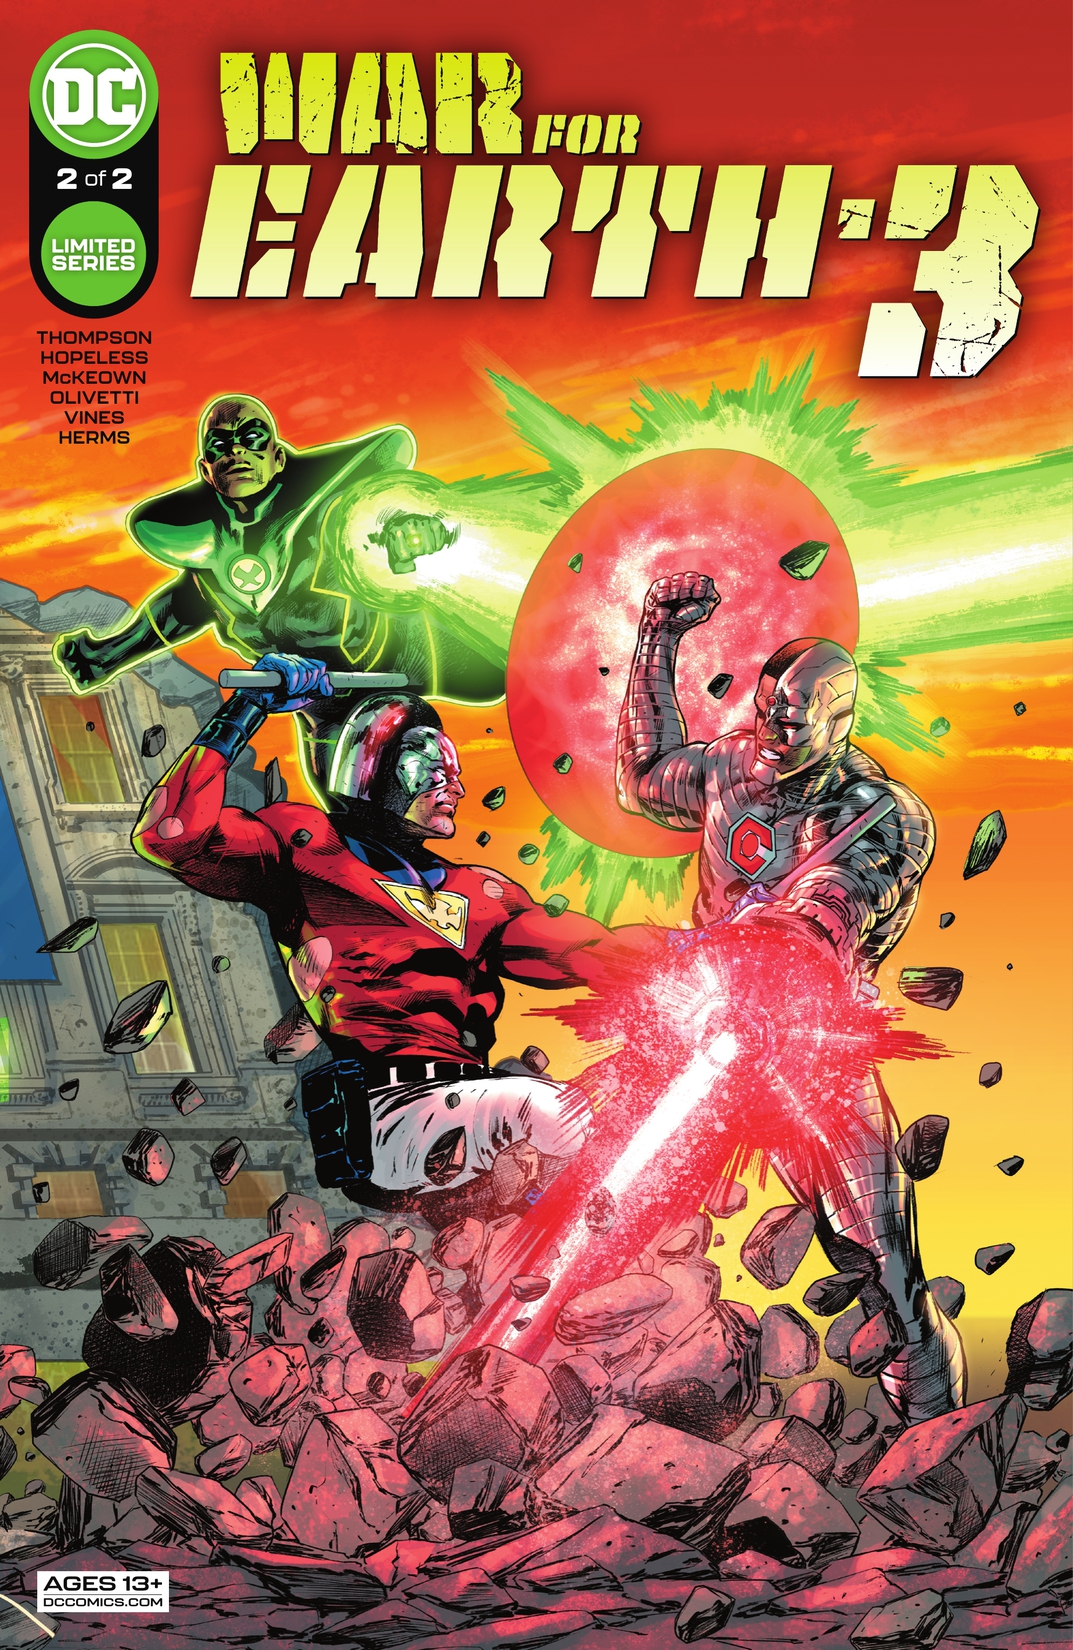 War for Earth-3 #2 preview images